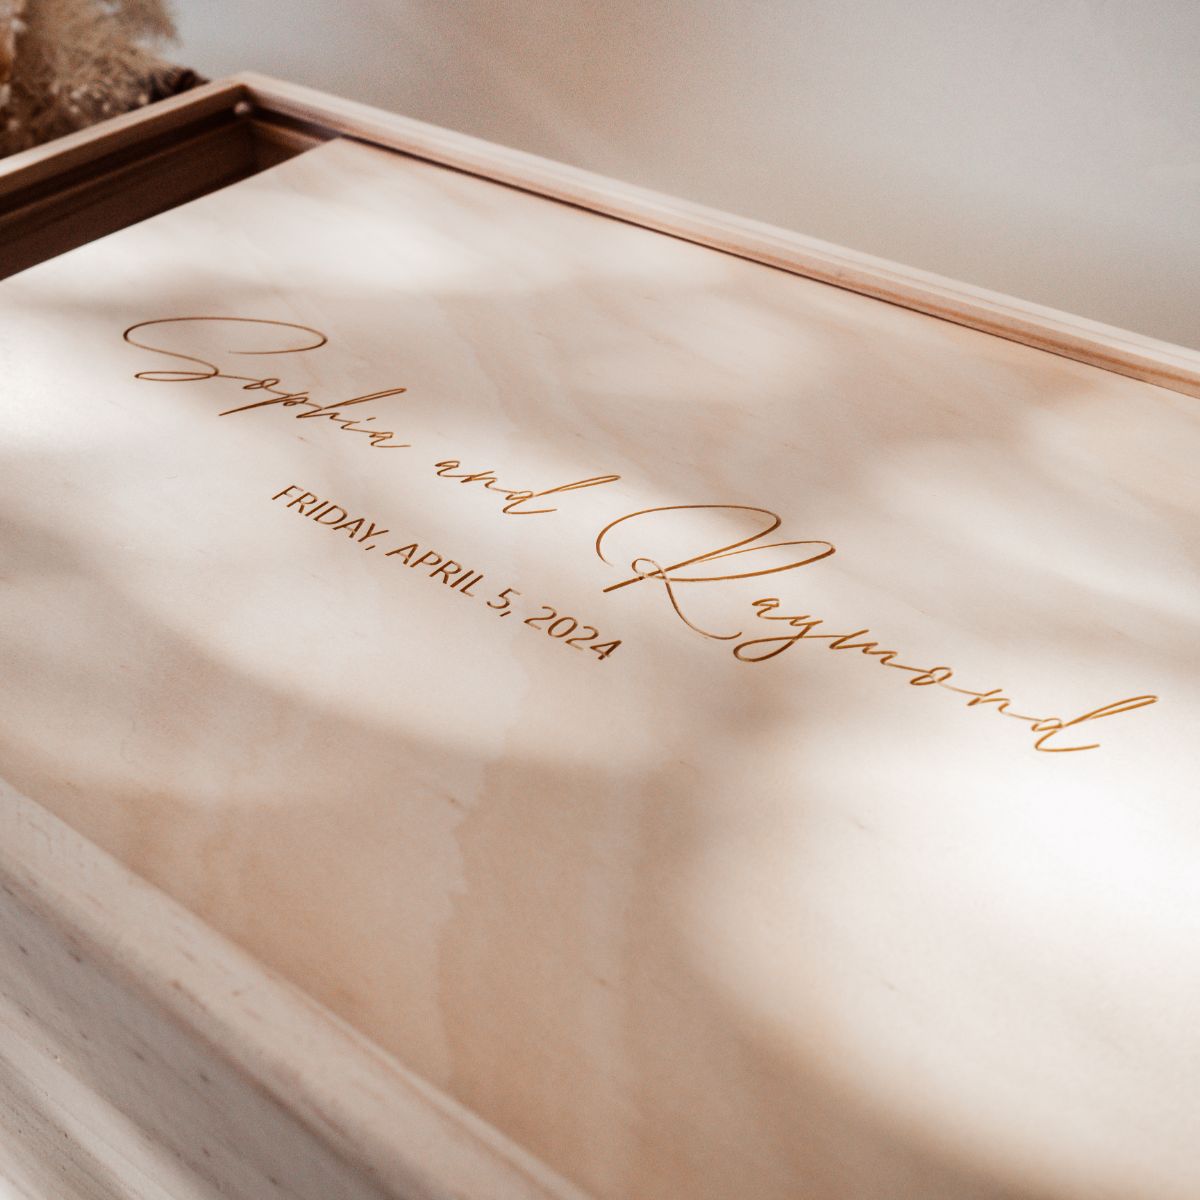 This is a closeup of a large wooden wedding keepsake box with a cursive text design and a date of the wedding underneath